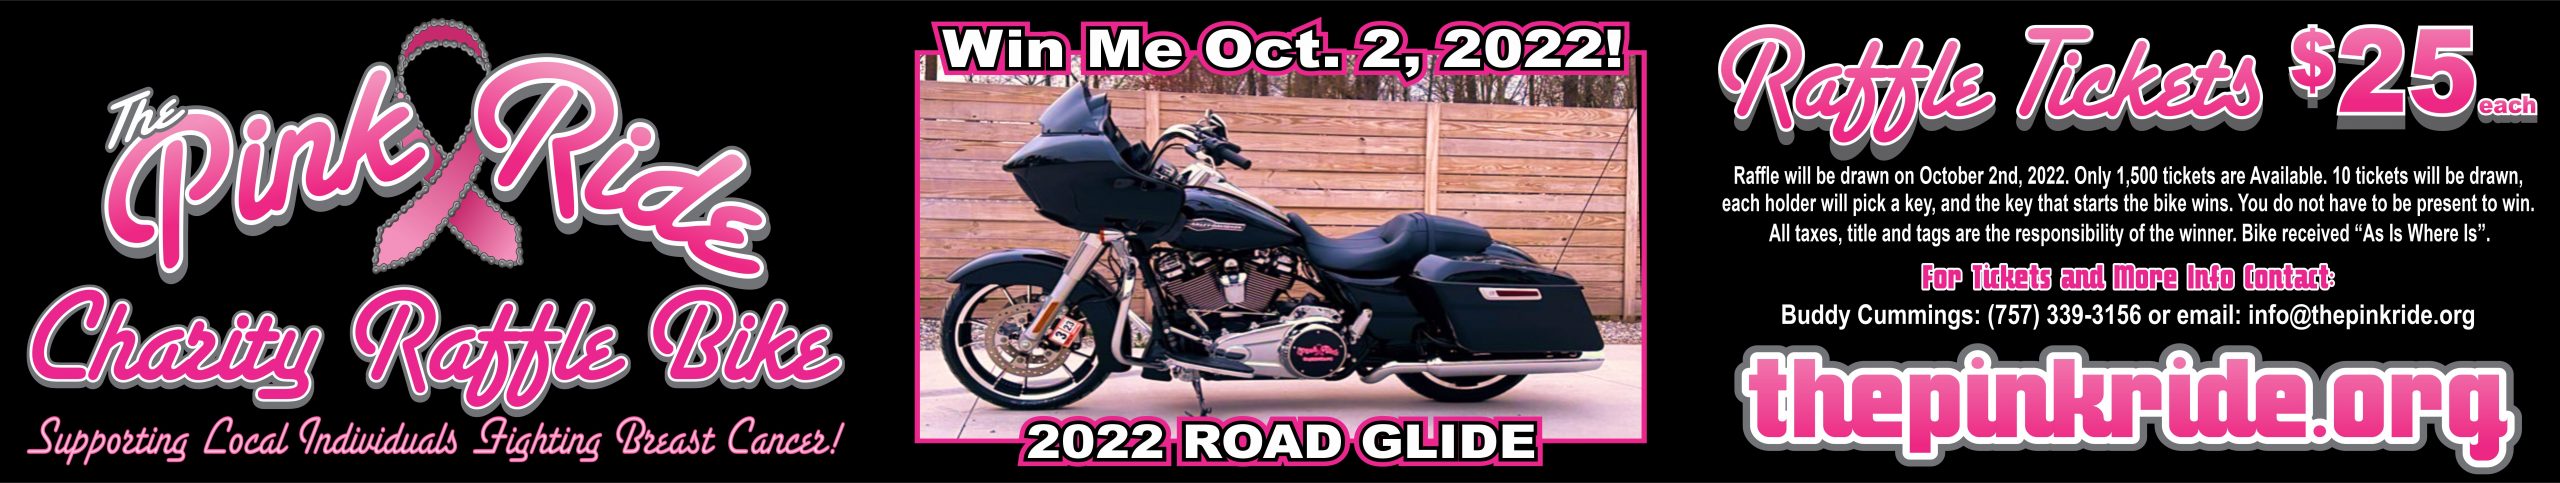 The Pink Ride Charity Raffle Bike Supporting Local Individuals Fighting Breast Cancer Raffle Tickets $25